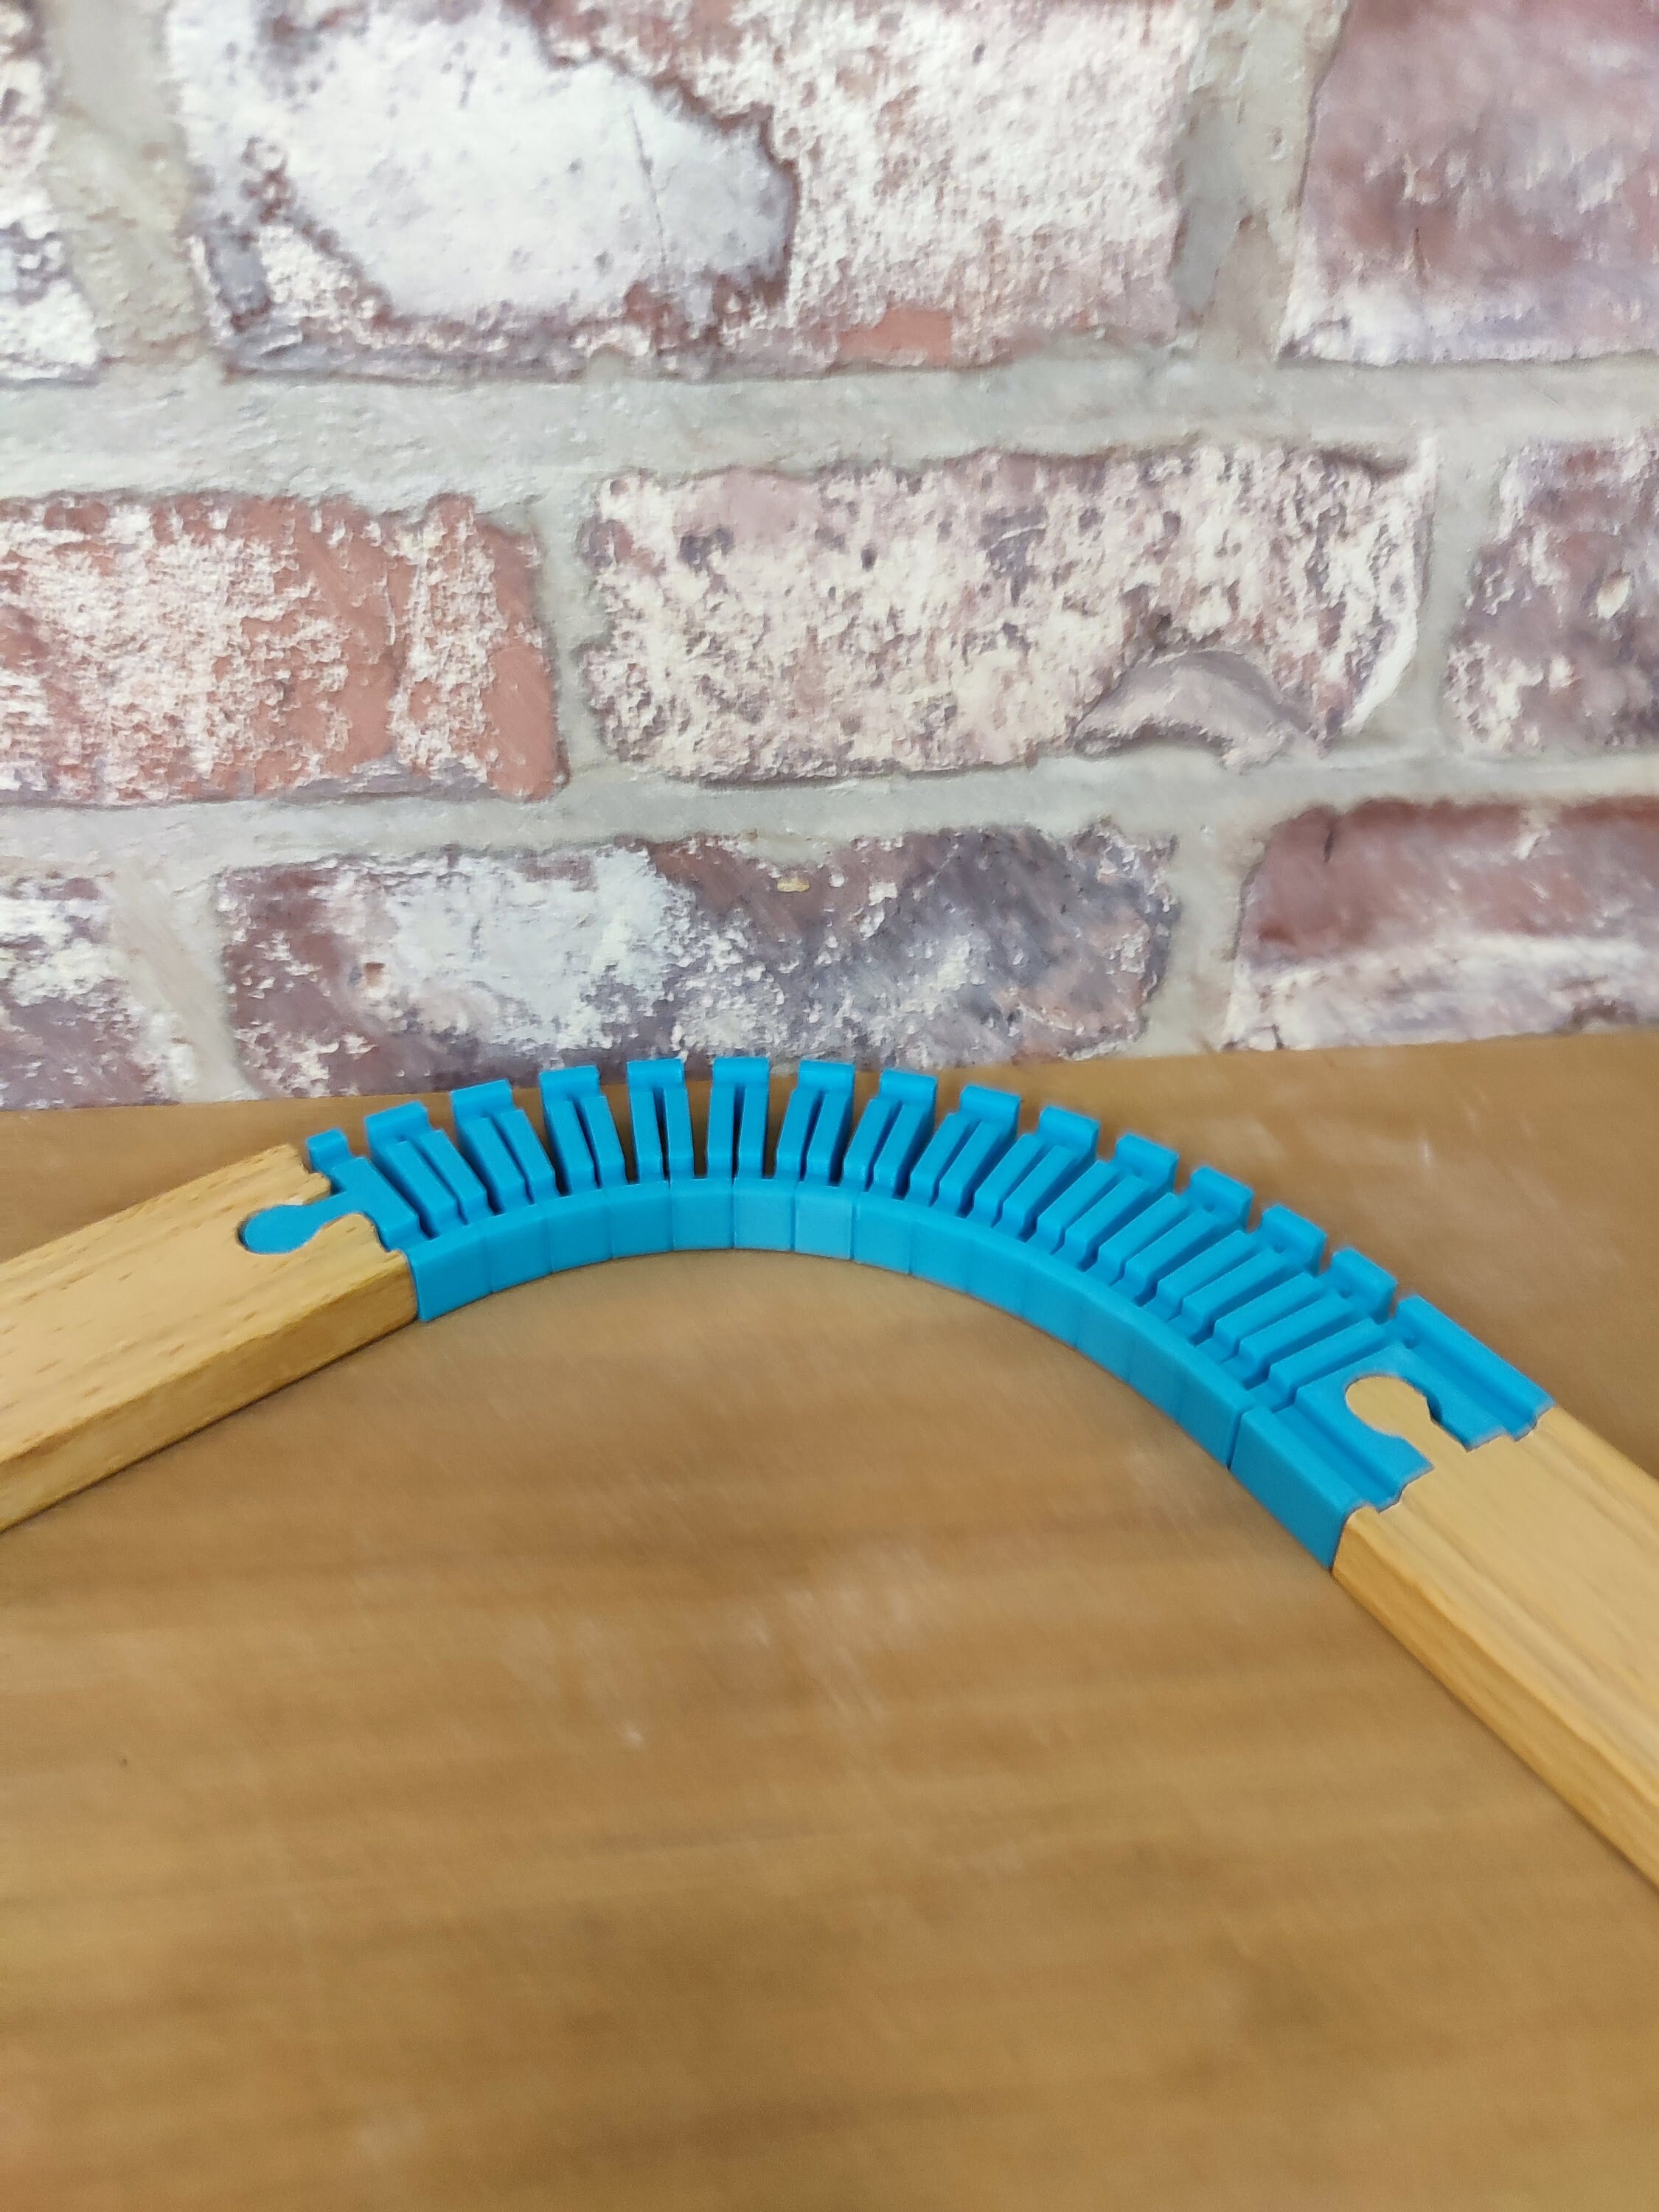 Small Turntable for Wooden Train Track, Compatible With Brio, Ikea, Bigjigs  and More 